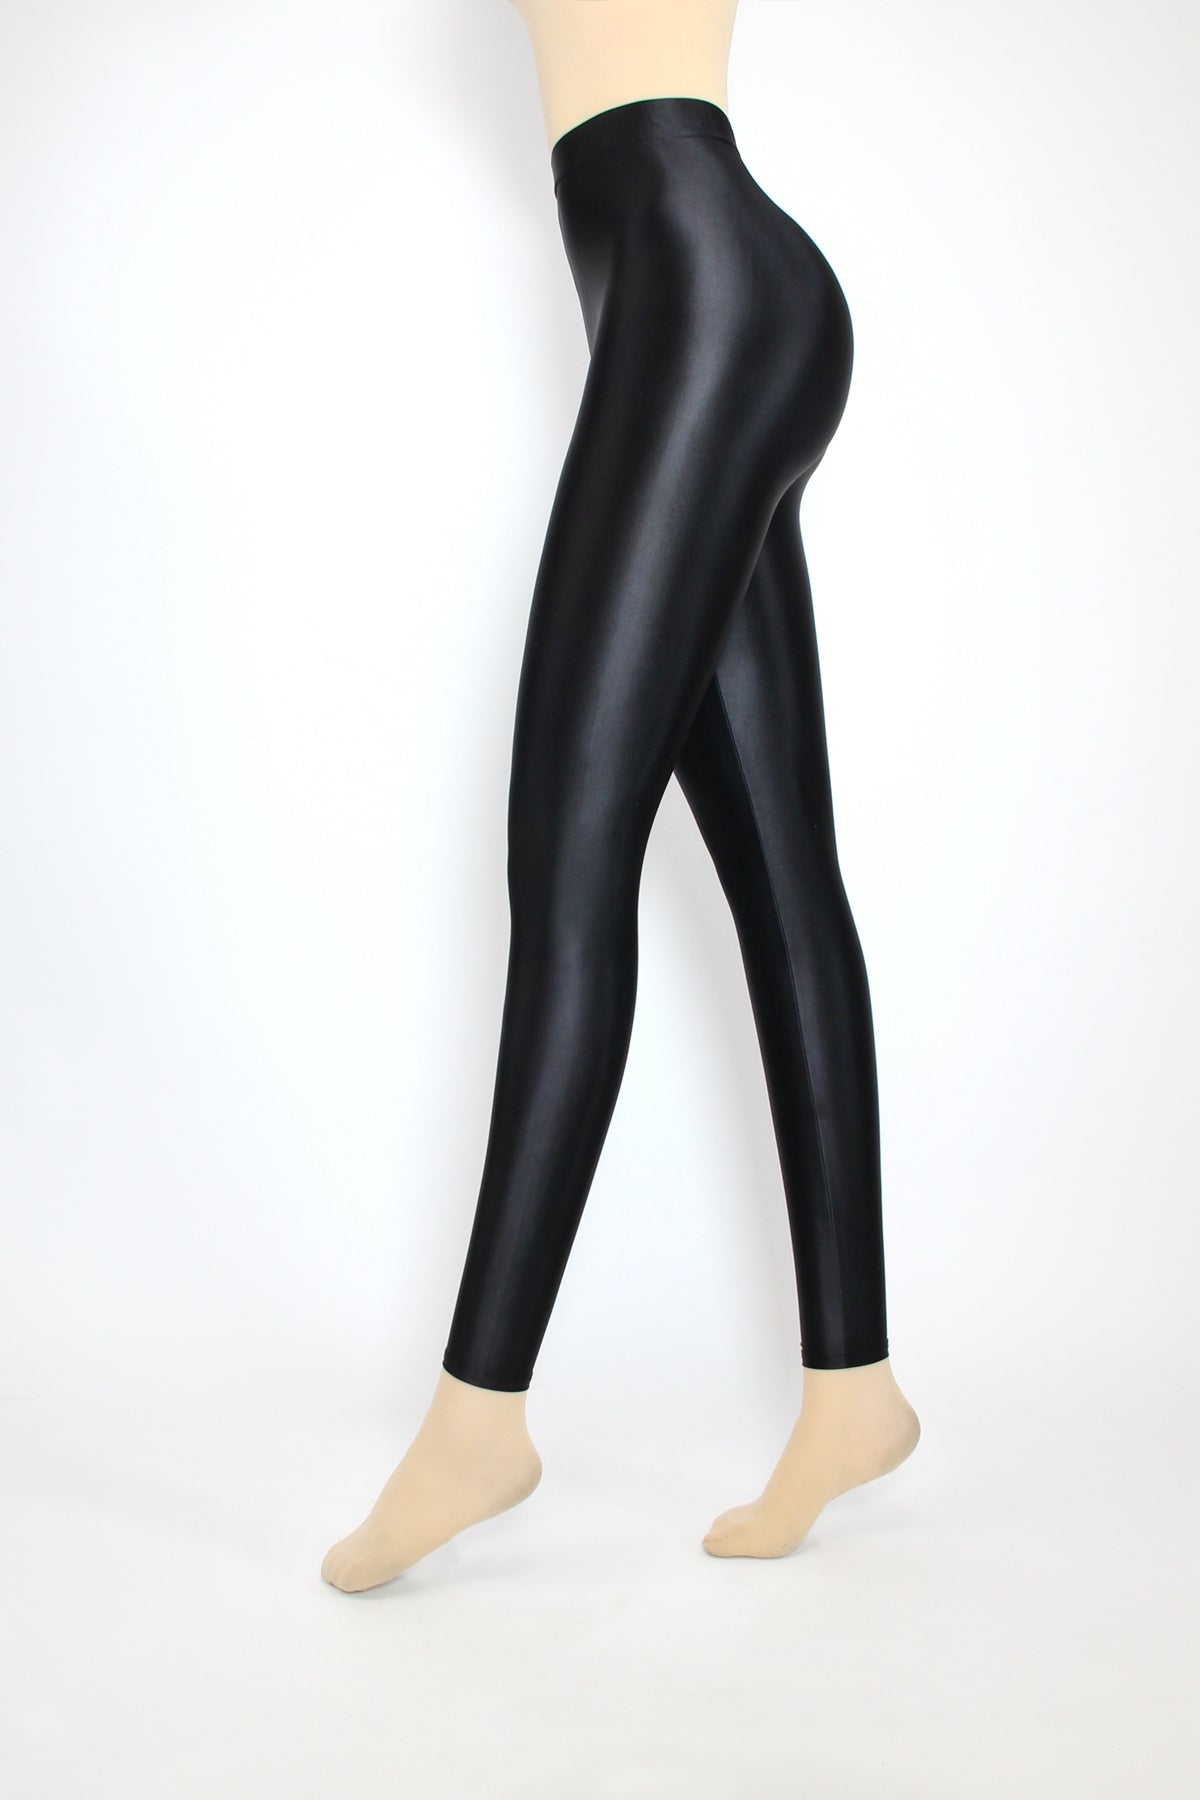 SEXY WOMEN OIL Shiny High Waisted Stretchy Disco Pants Leggings